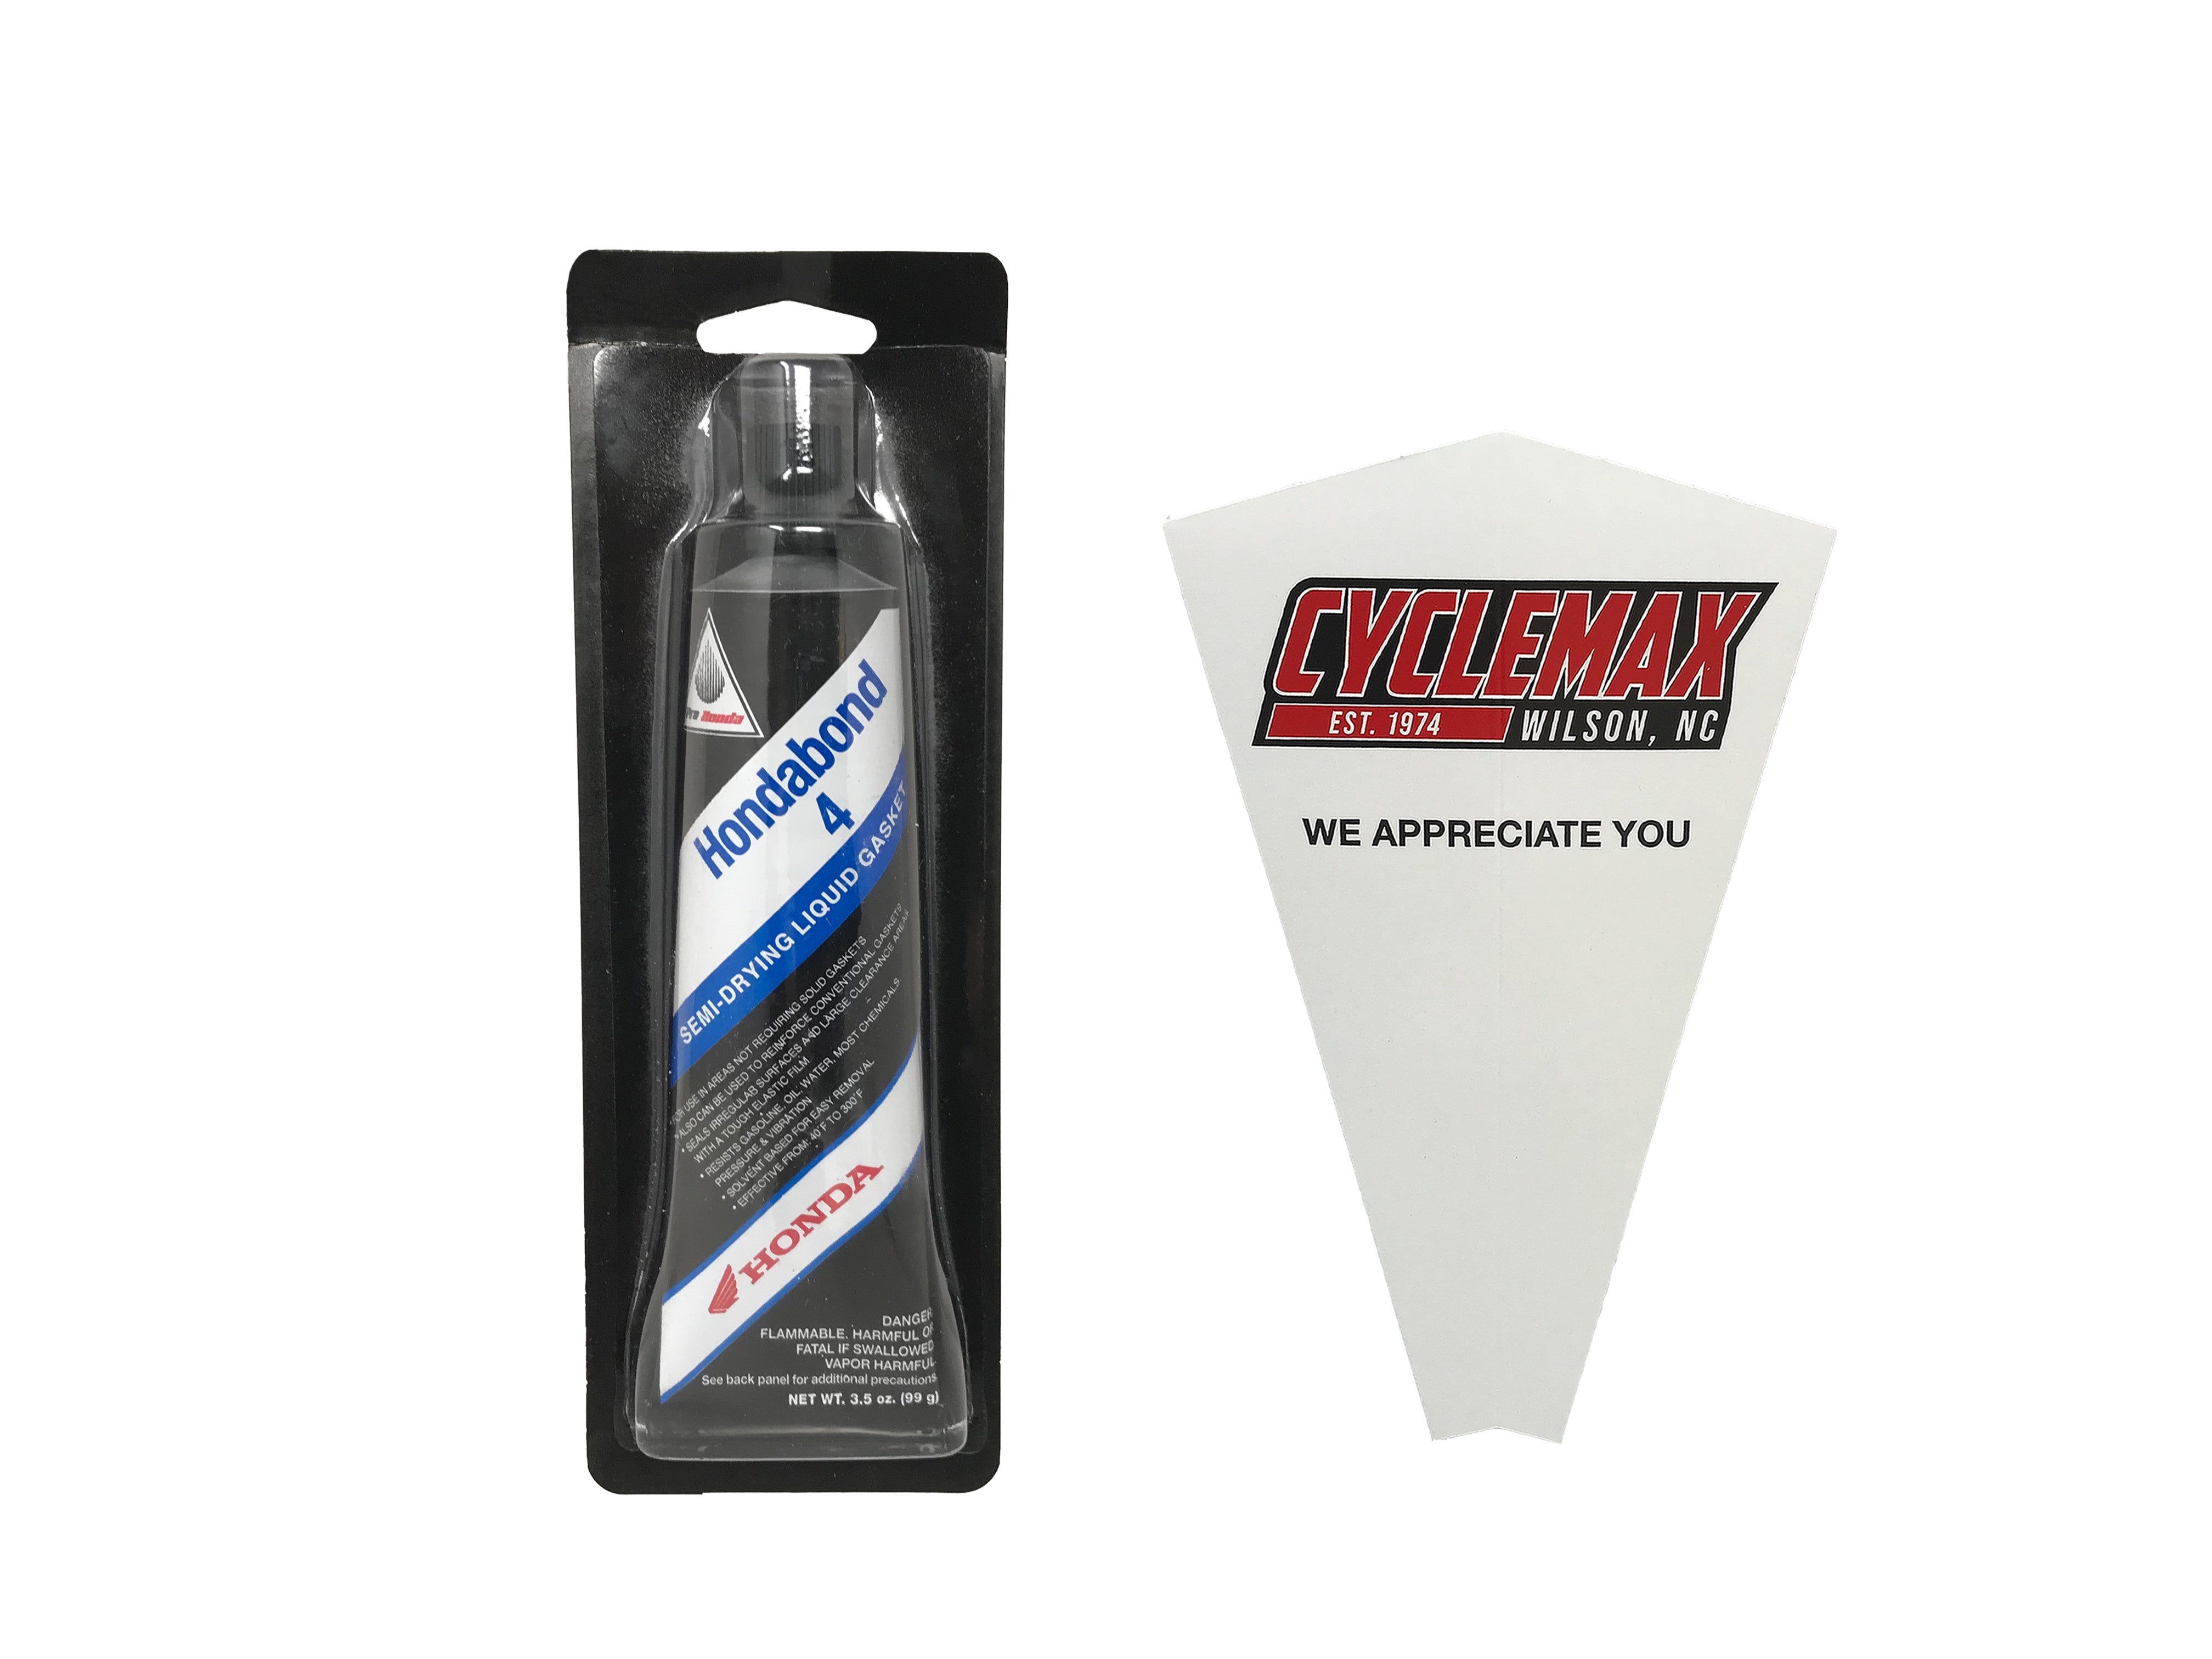 Cyclemax One Pack for Honda Hondabond 4 Semi-Drying Liquid Gasket 08717-1194 Contains One 3.5oz Tube and a Funnel